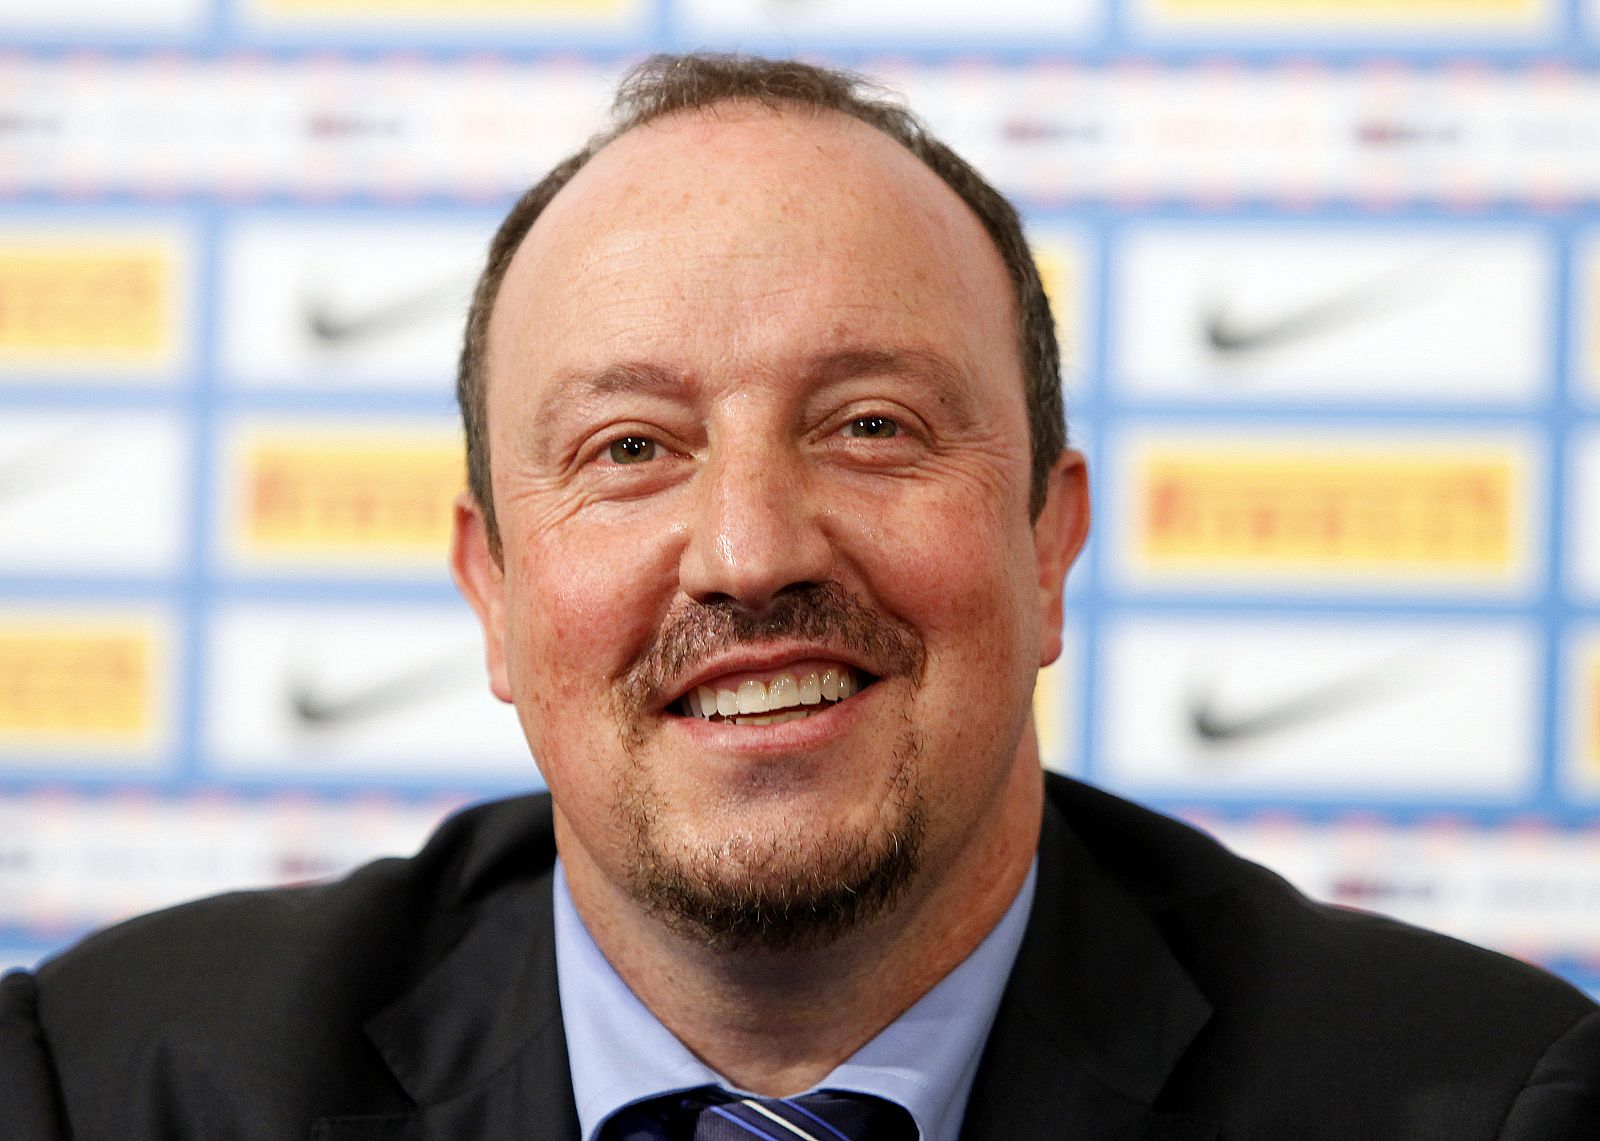 Benitez smiles at a news conference during his official unveiling as head coach of Inter Milan at the team's training center in Appiano Gentile, northern Milan